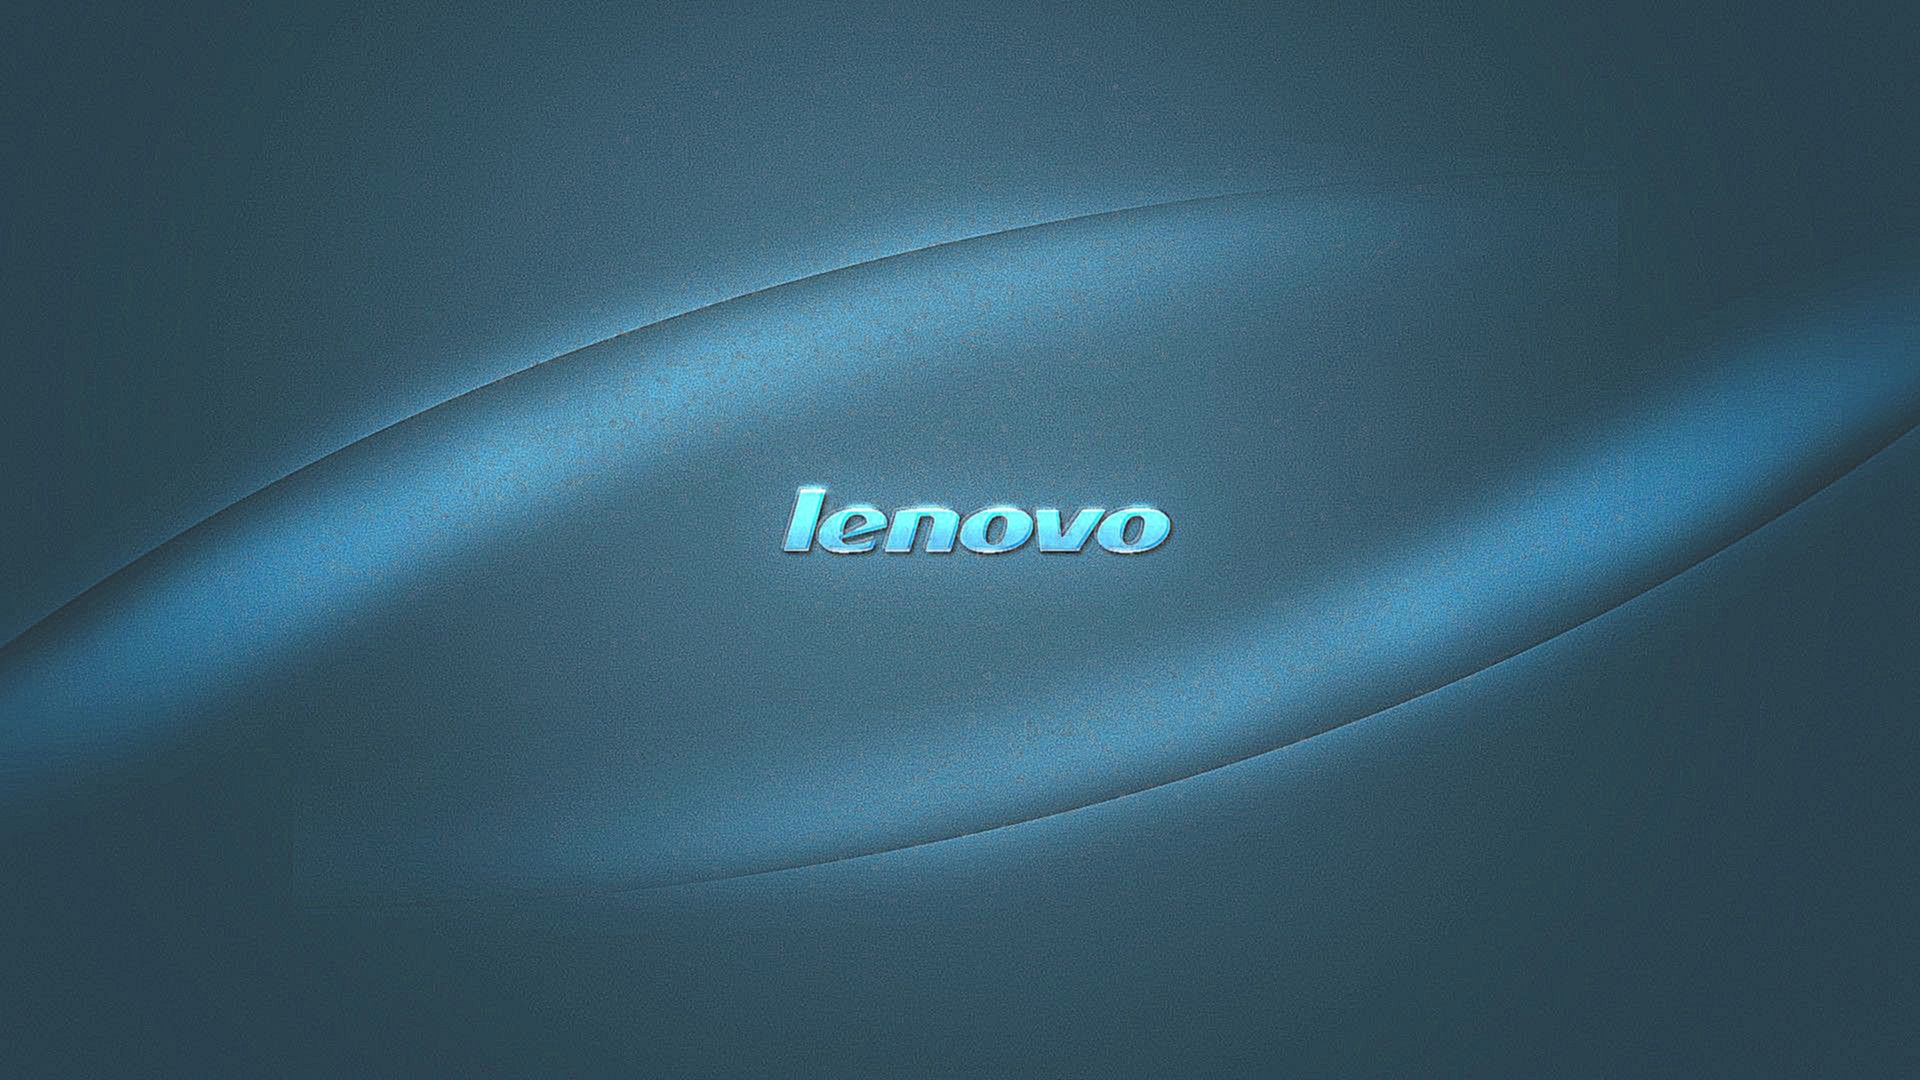 Lenovo Wallpaper Collection in HD for Download.